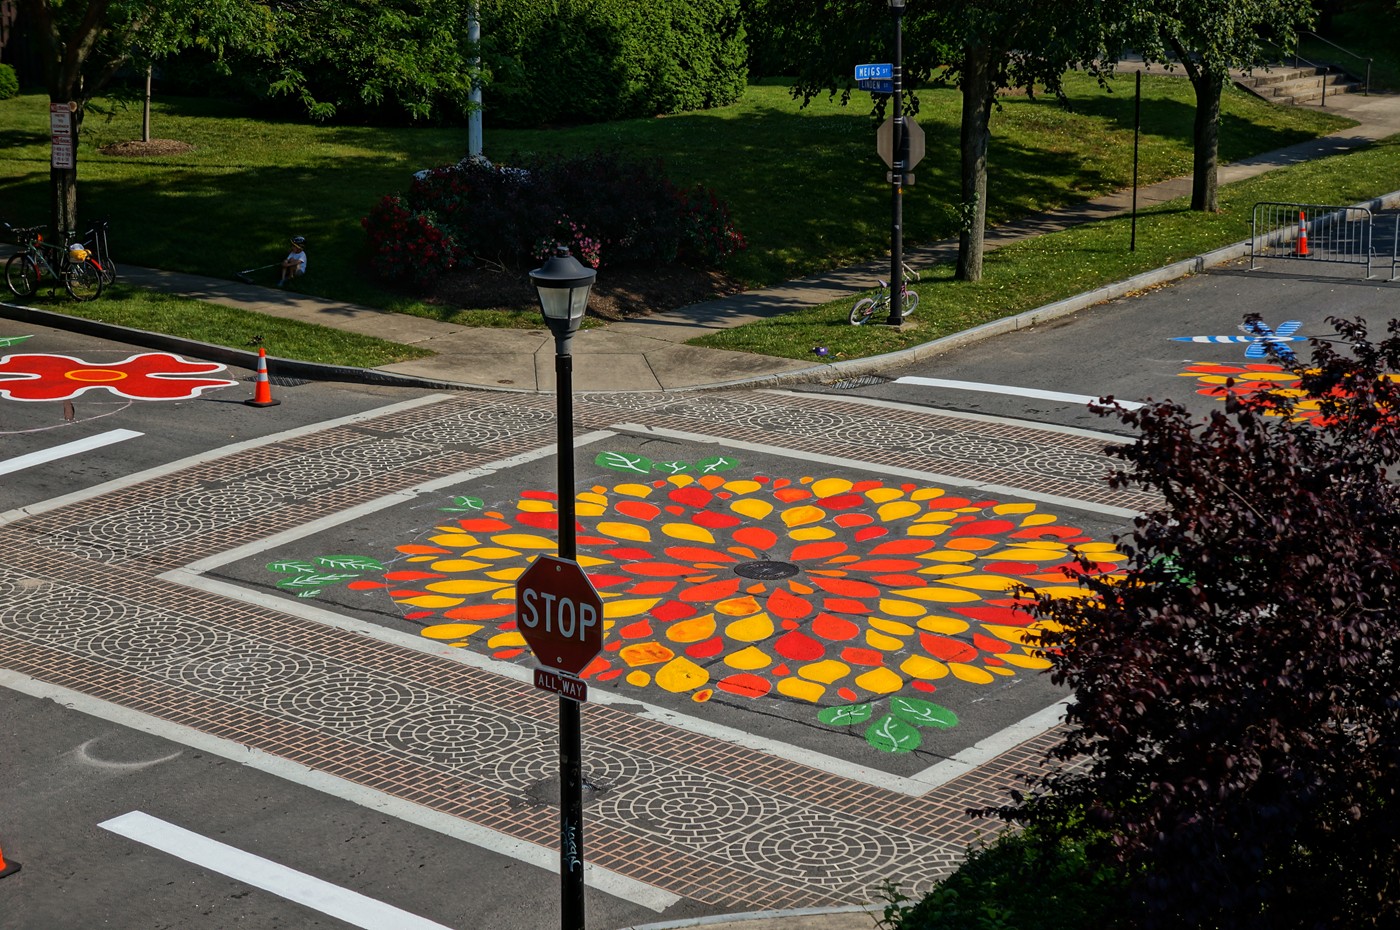 'BoulevART' street mural on the pavement at the intersection of Meigs & Linden. [Source: Highland Park Neighborhood]